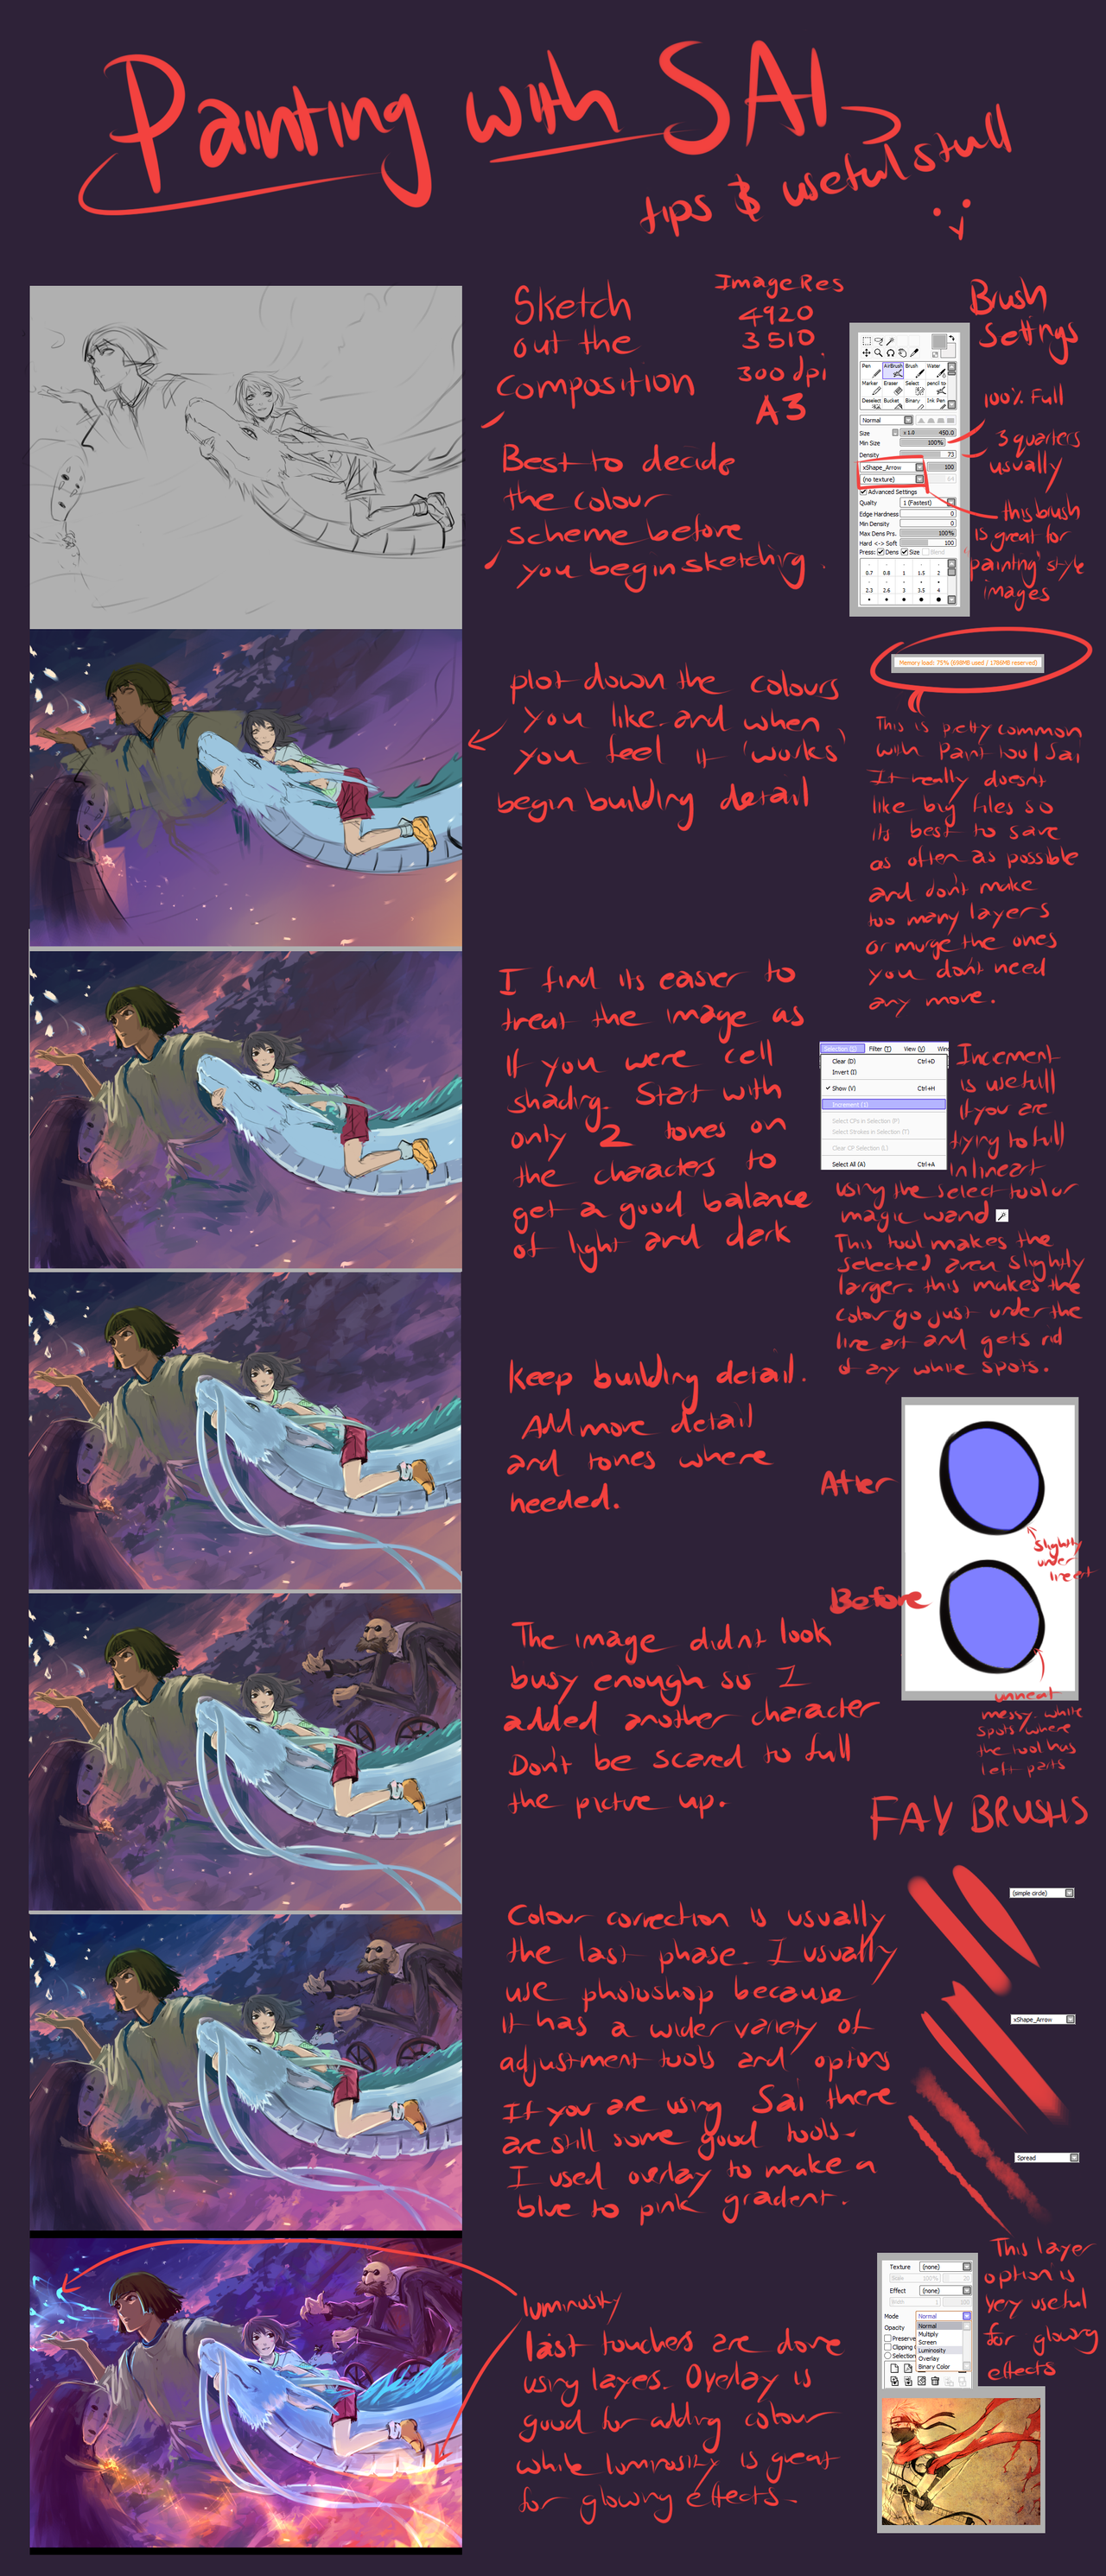  Painting  and Paint  Tool  Sai  tips  by moni158 on DeviantArt